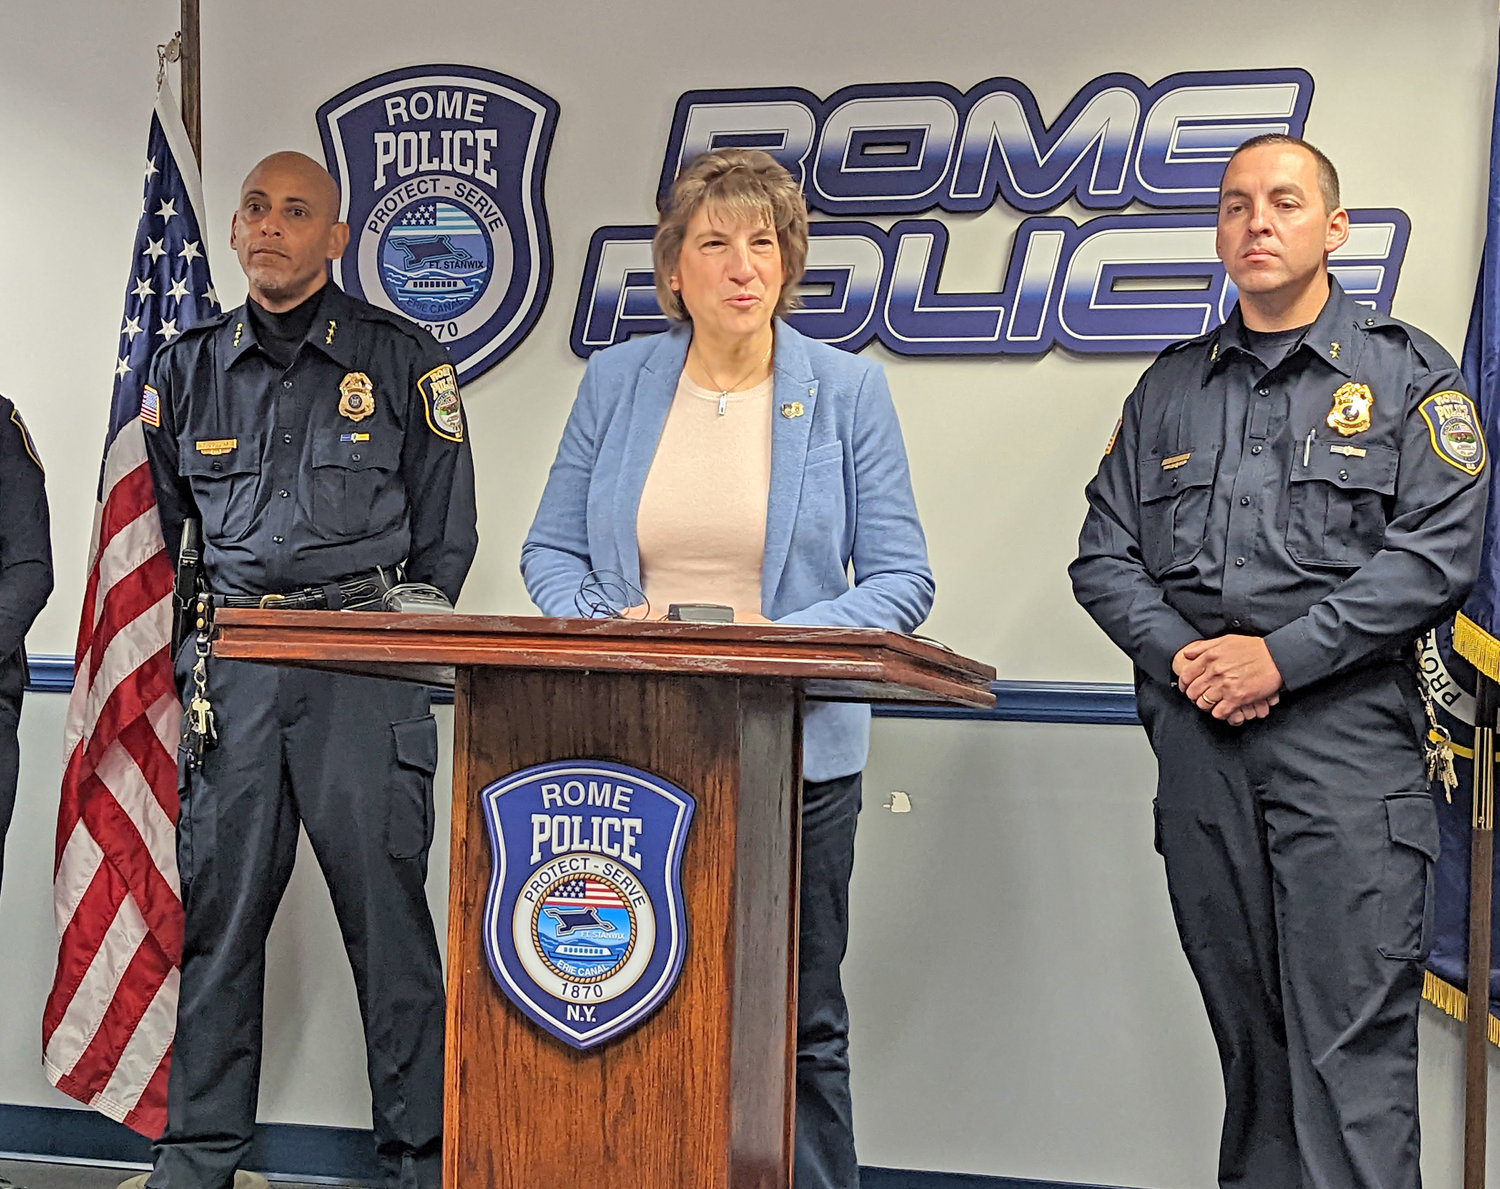 Mayor Jacqueline M. Izzo said Rome is “an extremely safe city” thanks to the efforts of the Rome Police Department. She said problems like bail reform and the lack of support for juvenile offenders and those with mental health issues need to be taken up by the New York State Legislature. From left: Police Chief David J. Collins; Izzo; and Deputy Chief Cheyenne D. Schoff.